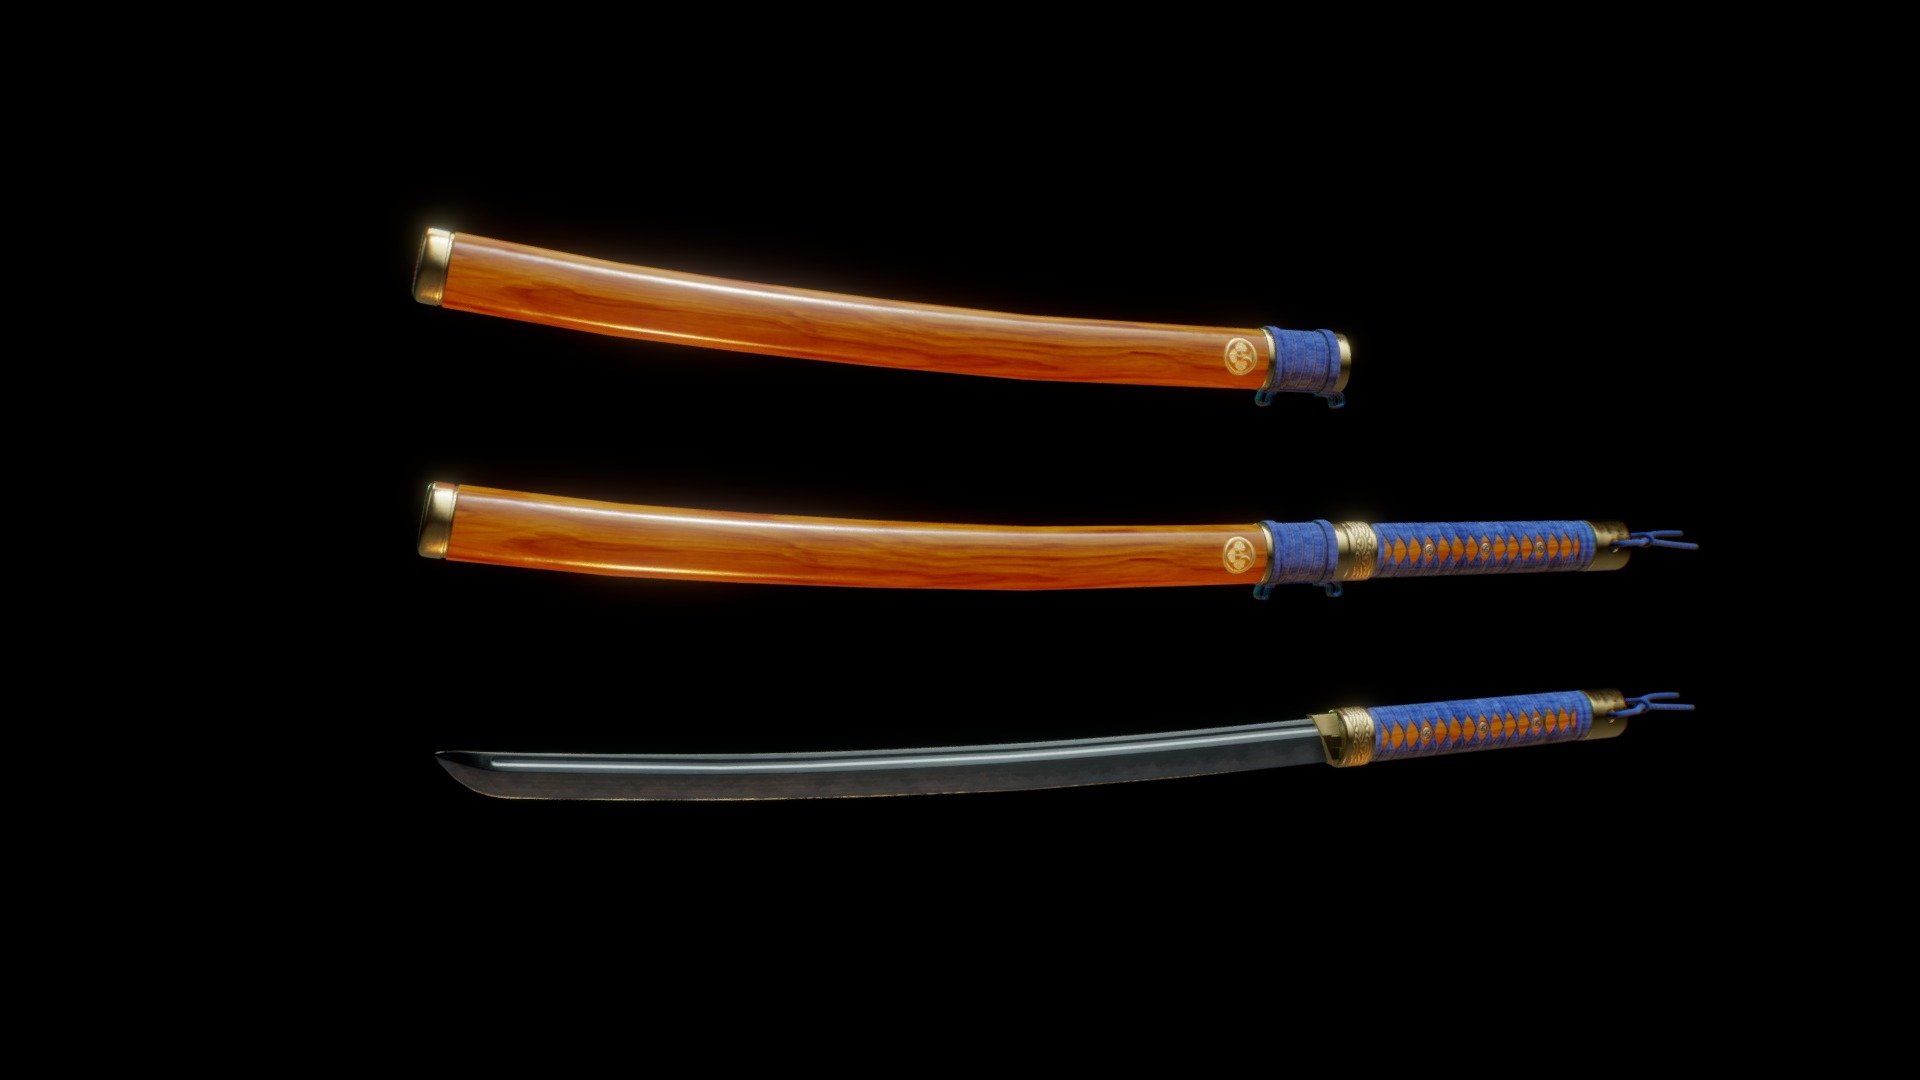 Game ready Katana. 

Comes with both the Katana and Scabbard models and their respective materials and textures.

Uses PBR shading and will work in both Unity and Unreal Engine 3d model